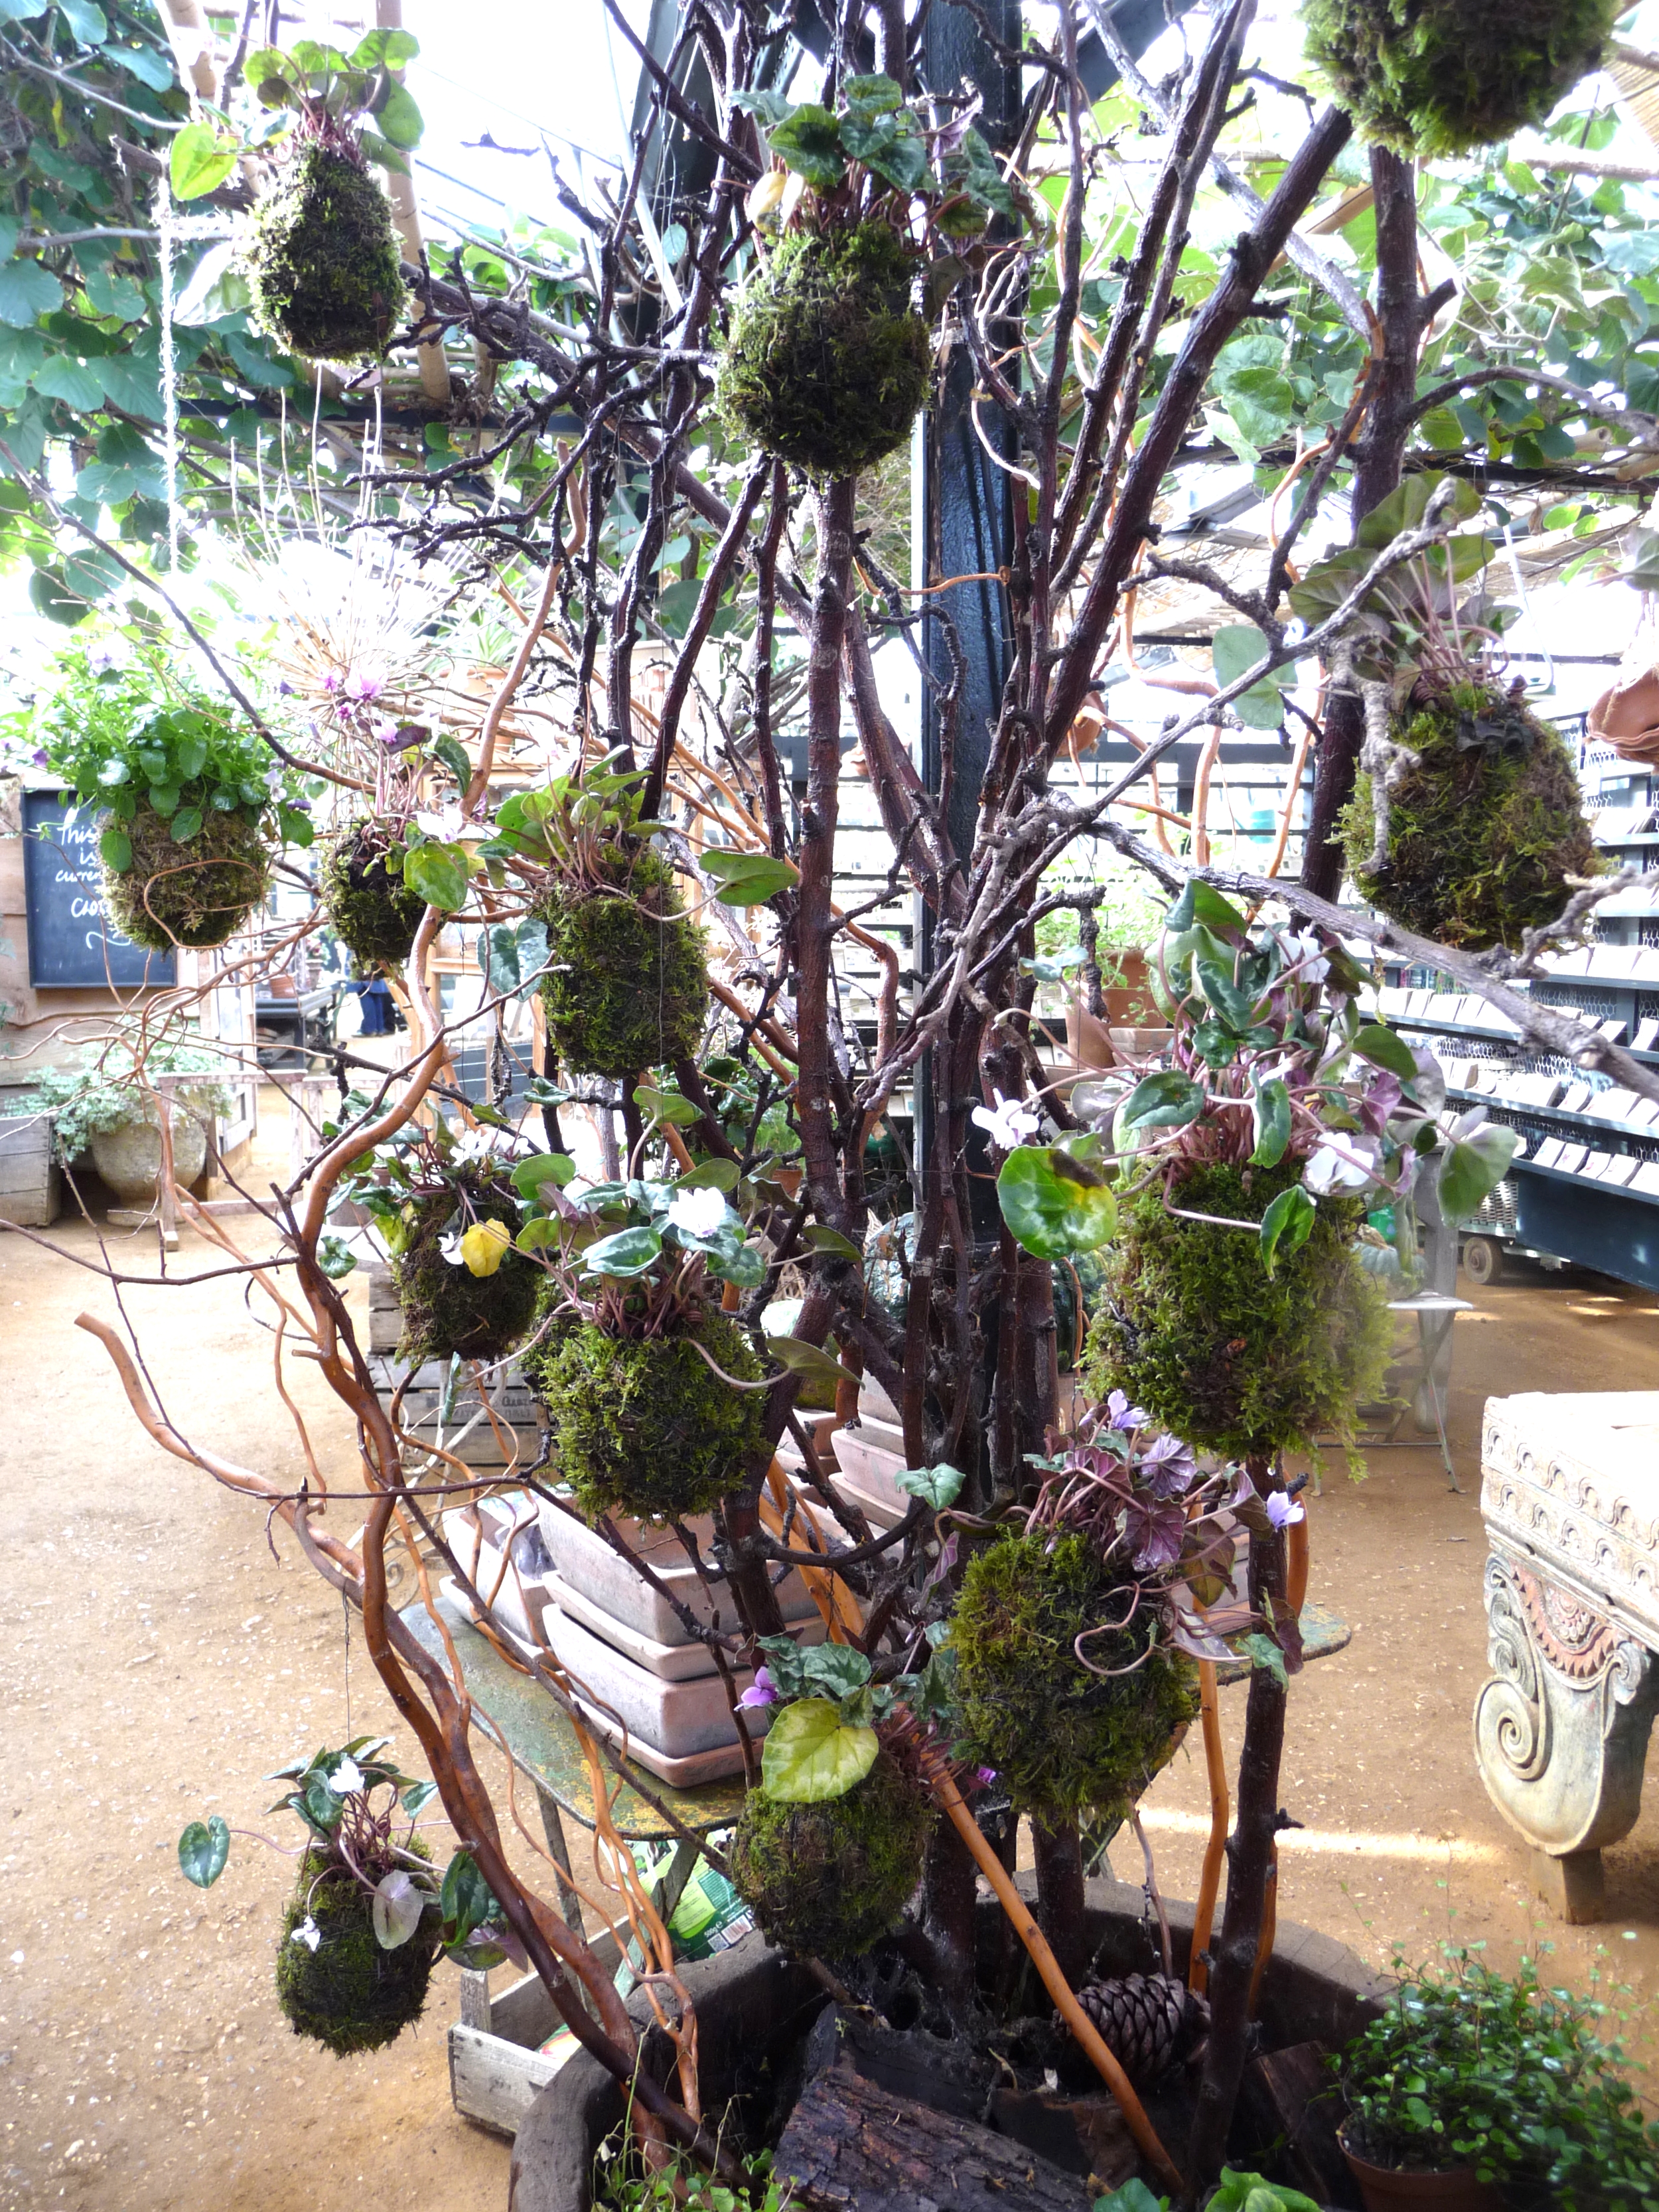  Clever display of plants which are wrapped in Sphagnum moss and chicken wire or twine to hold the soil and moss in place. 